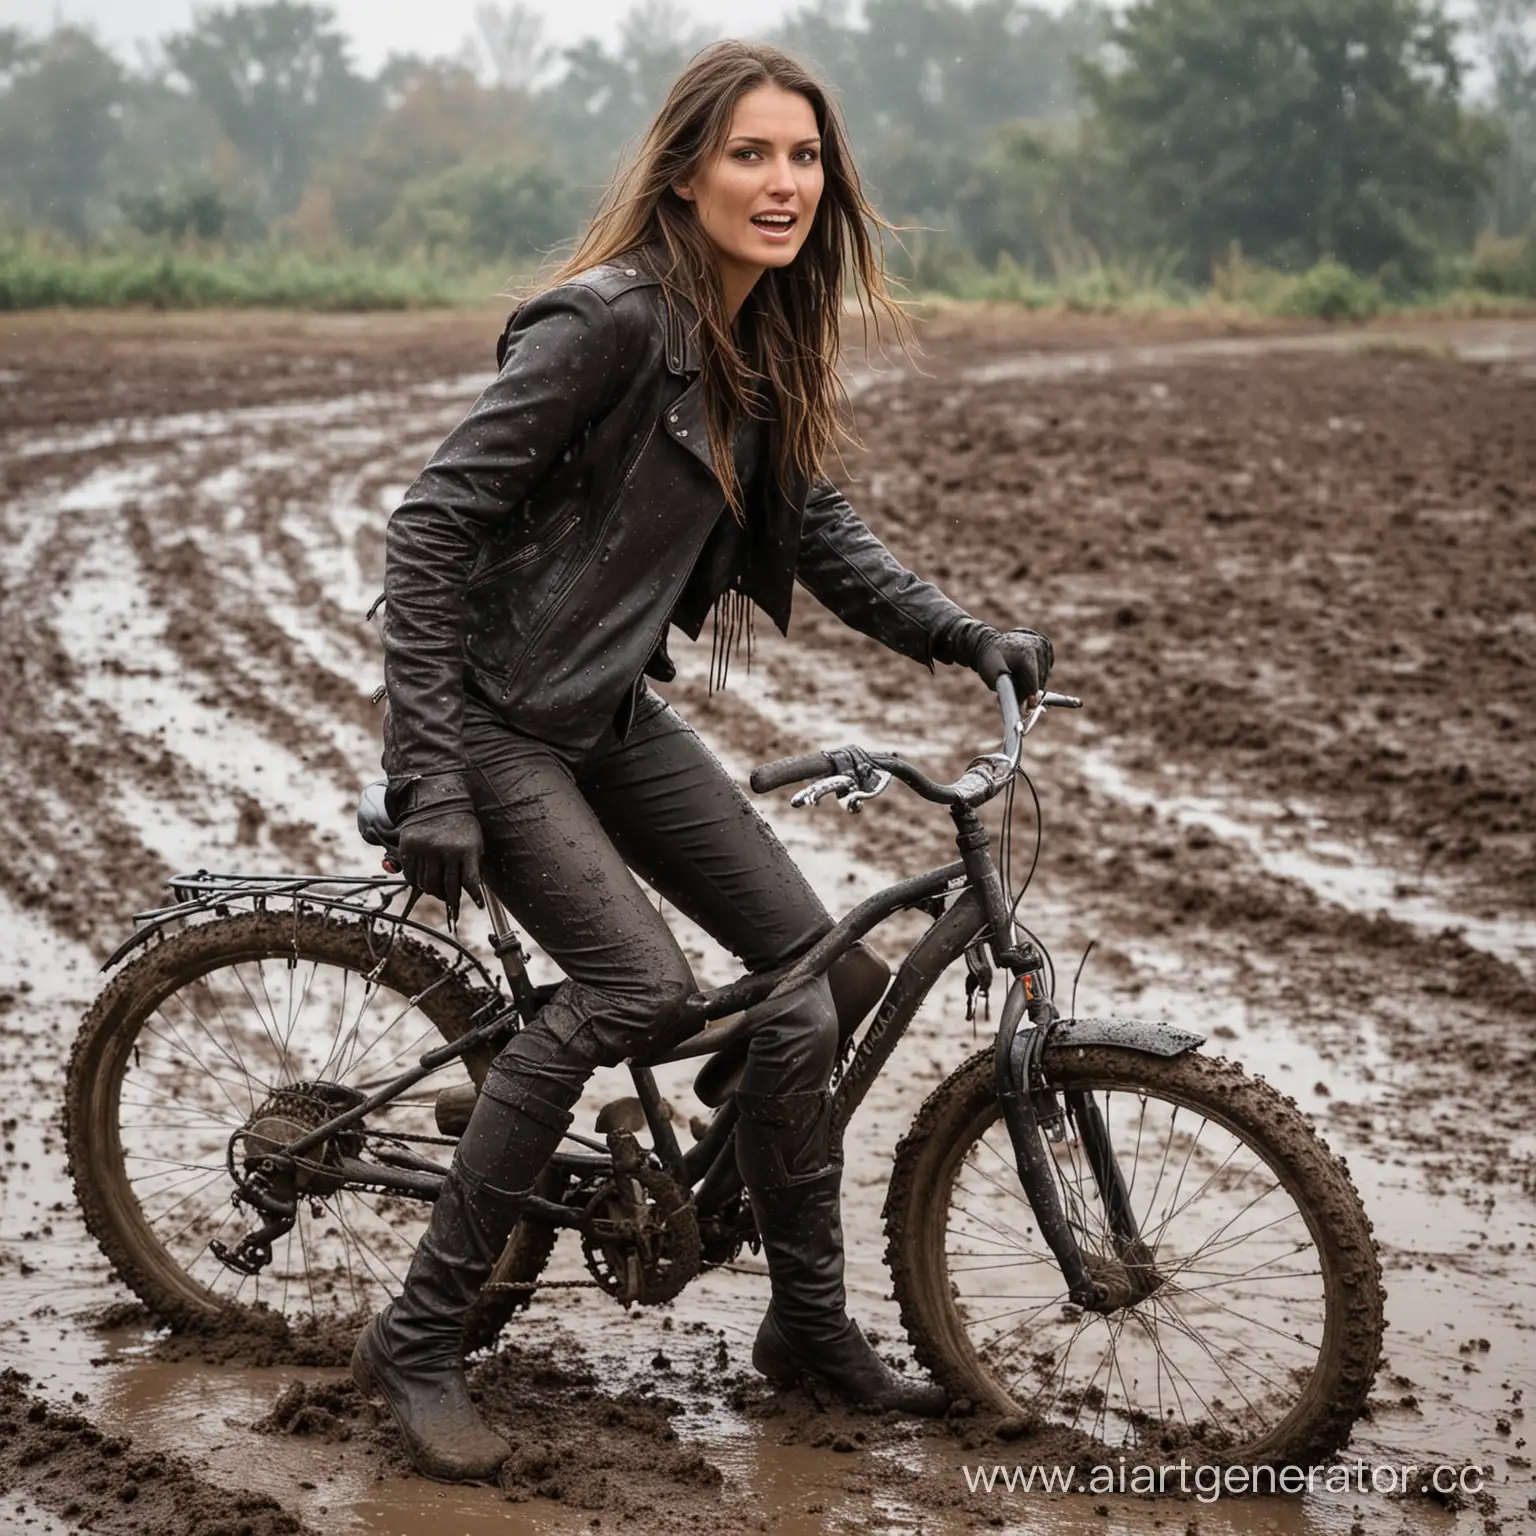 Muddy-Adventure-Woman-Cycling-Through-Mud-in-Leather-Coat-and-Leggings